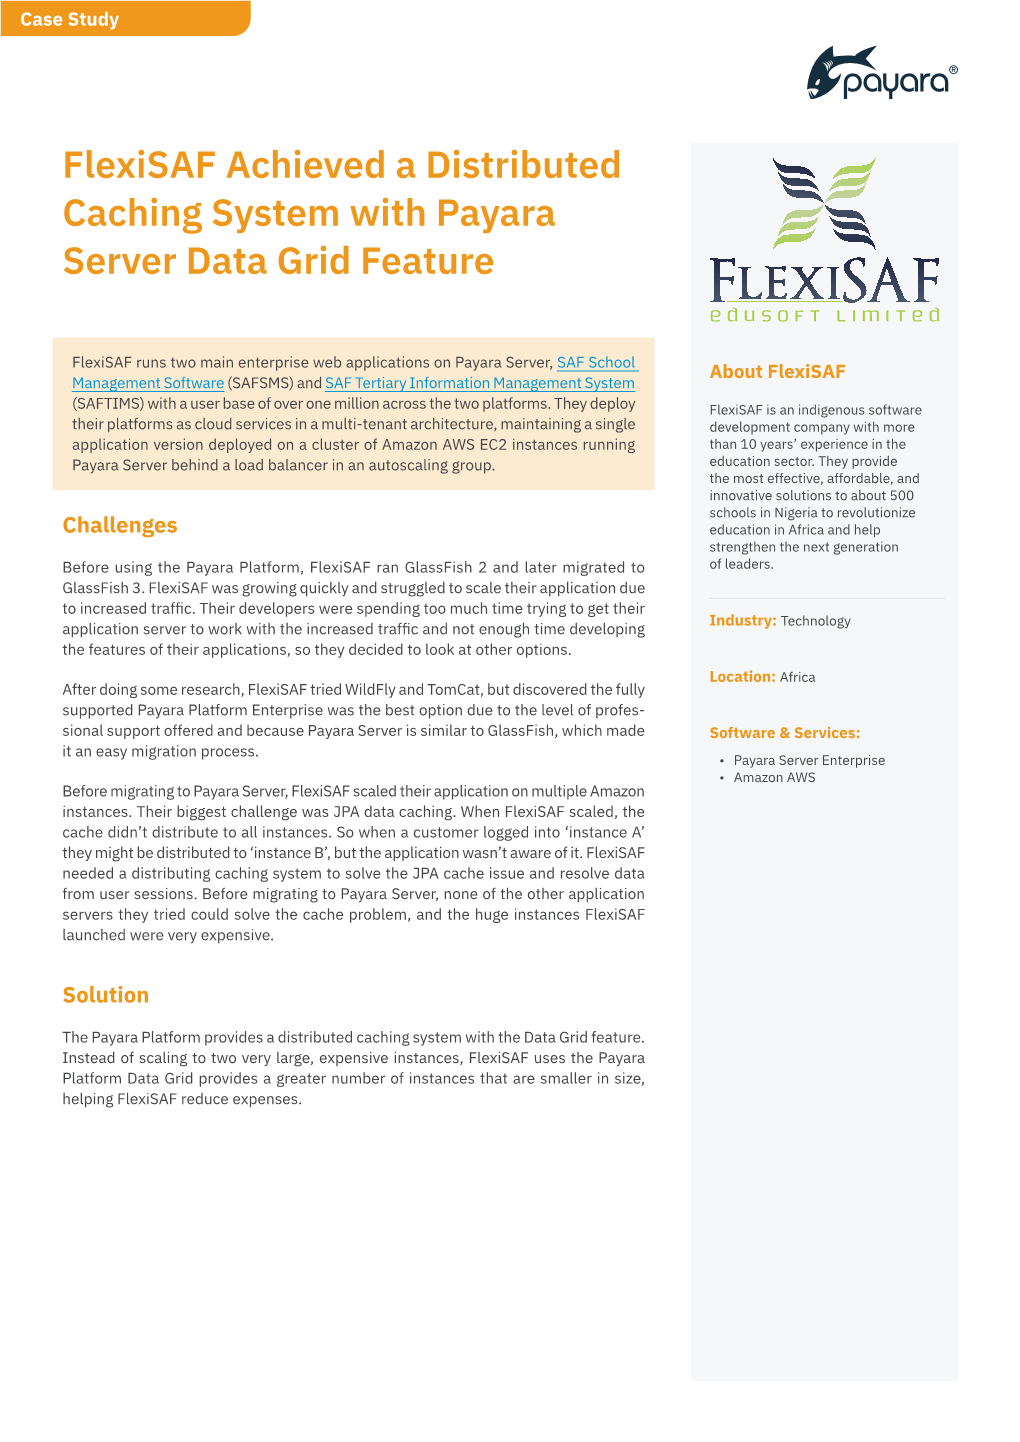 Flexisaf Achieved a Distributed Caching System with Payara Server